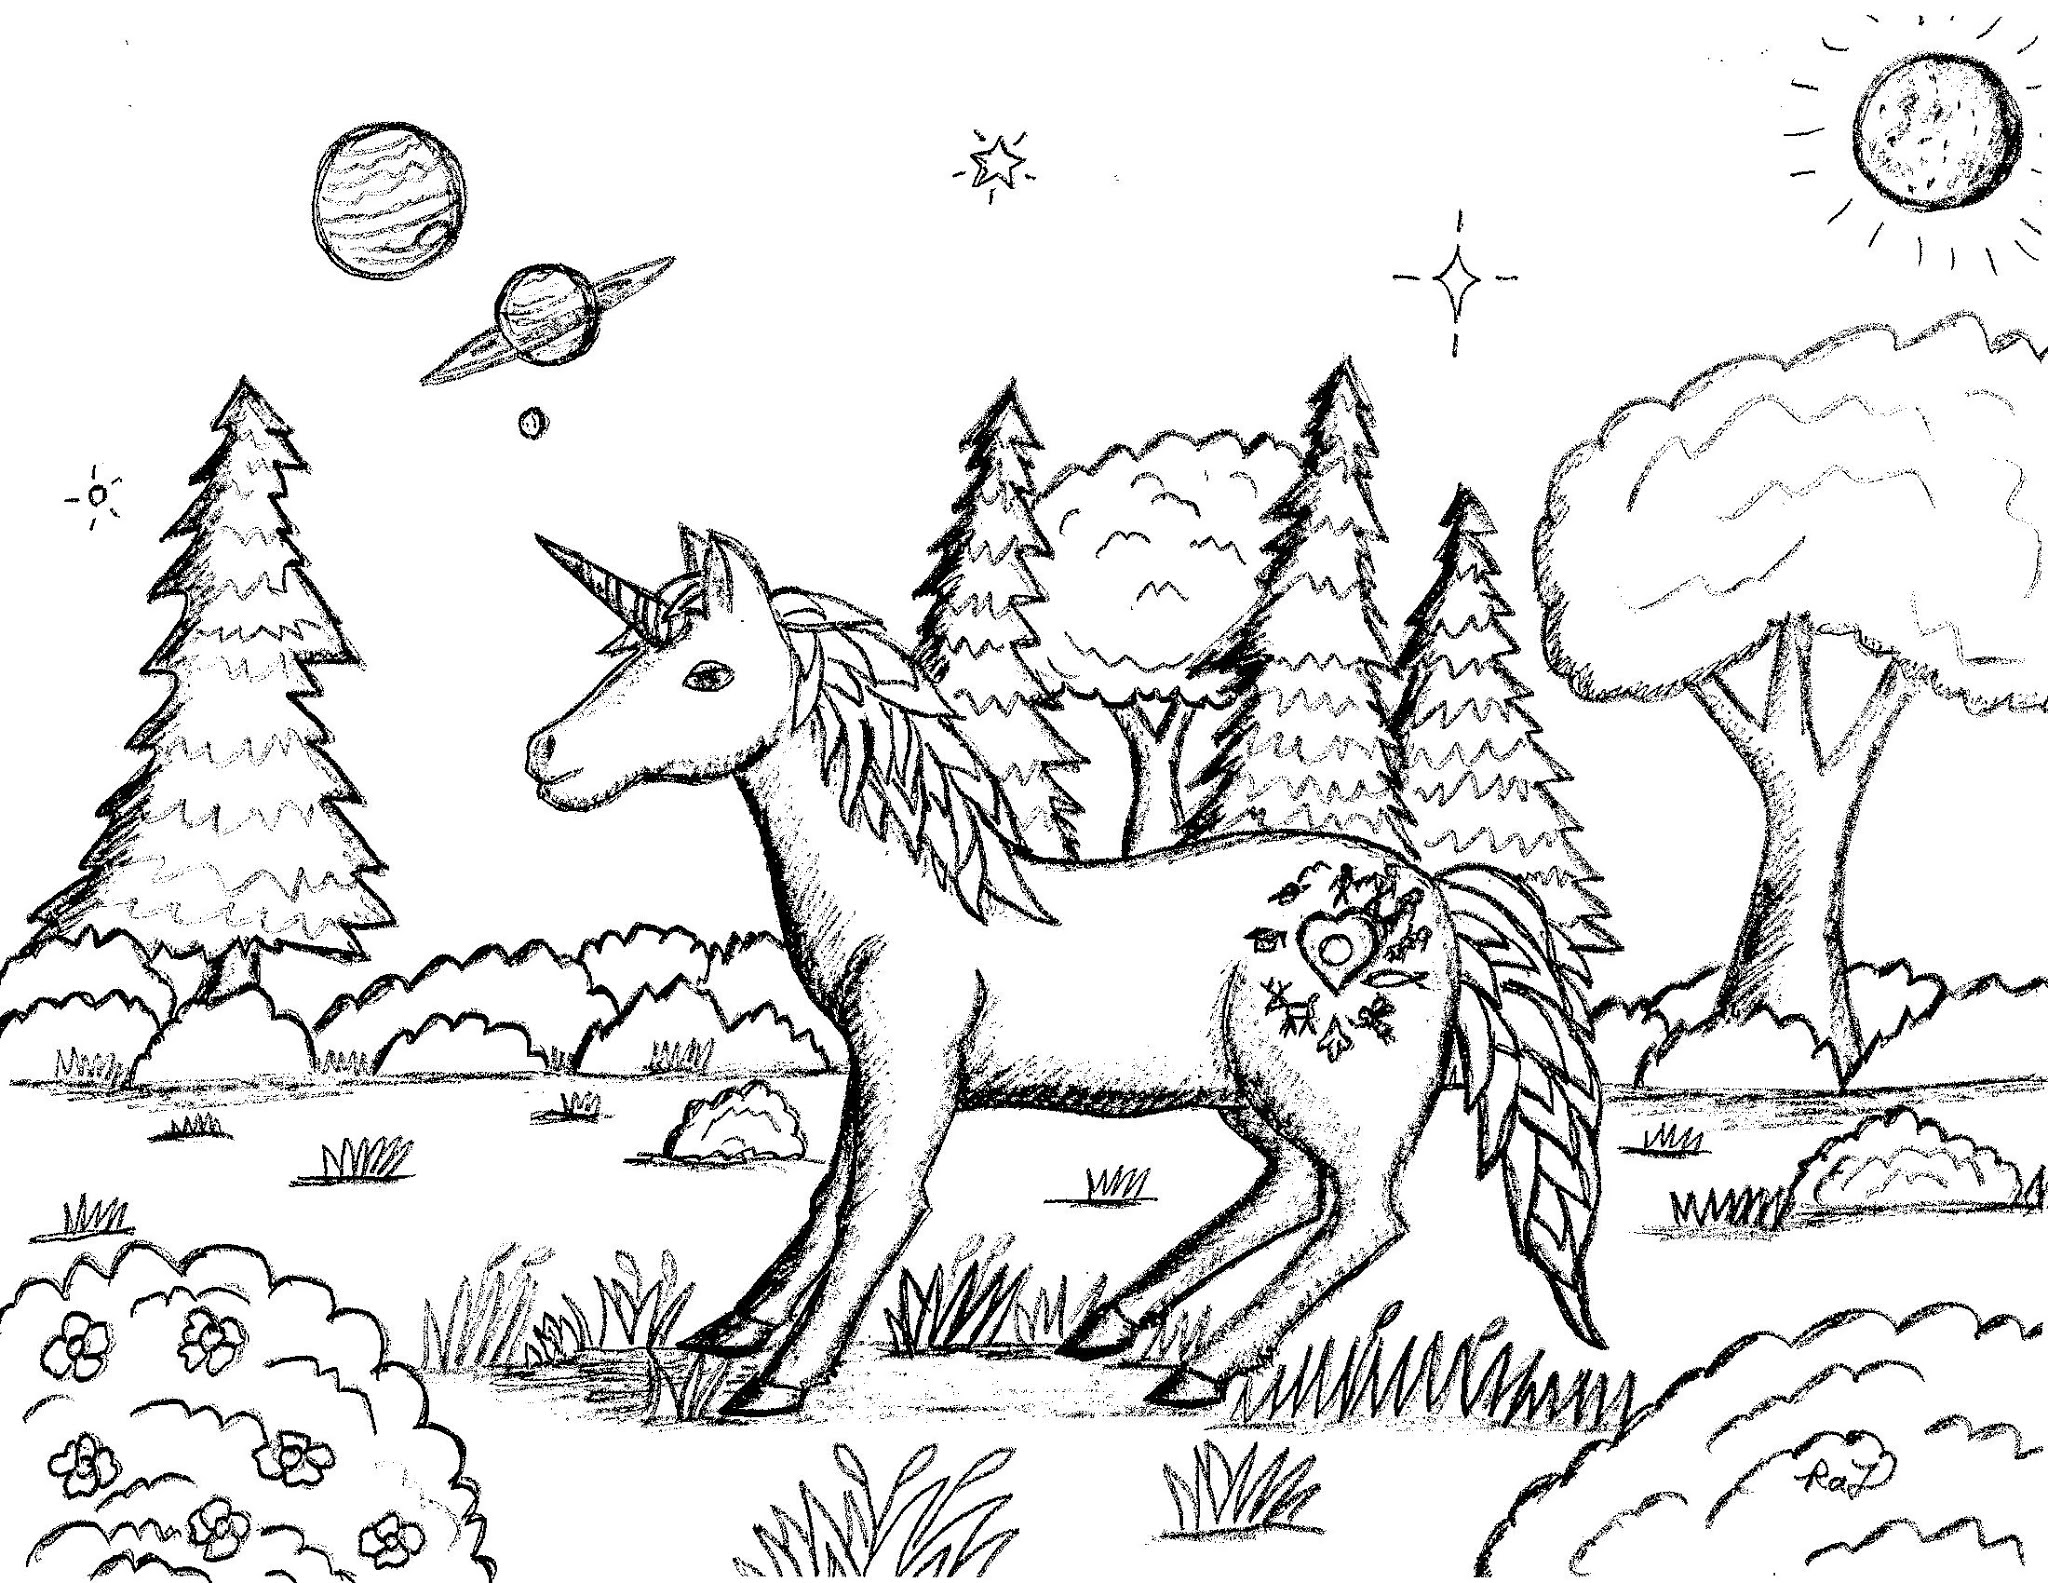 Robin's Great Coloring Pages: Night Unicorn with Cutie Mark coloring page